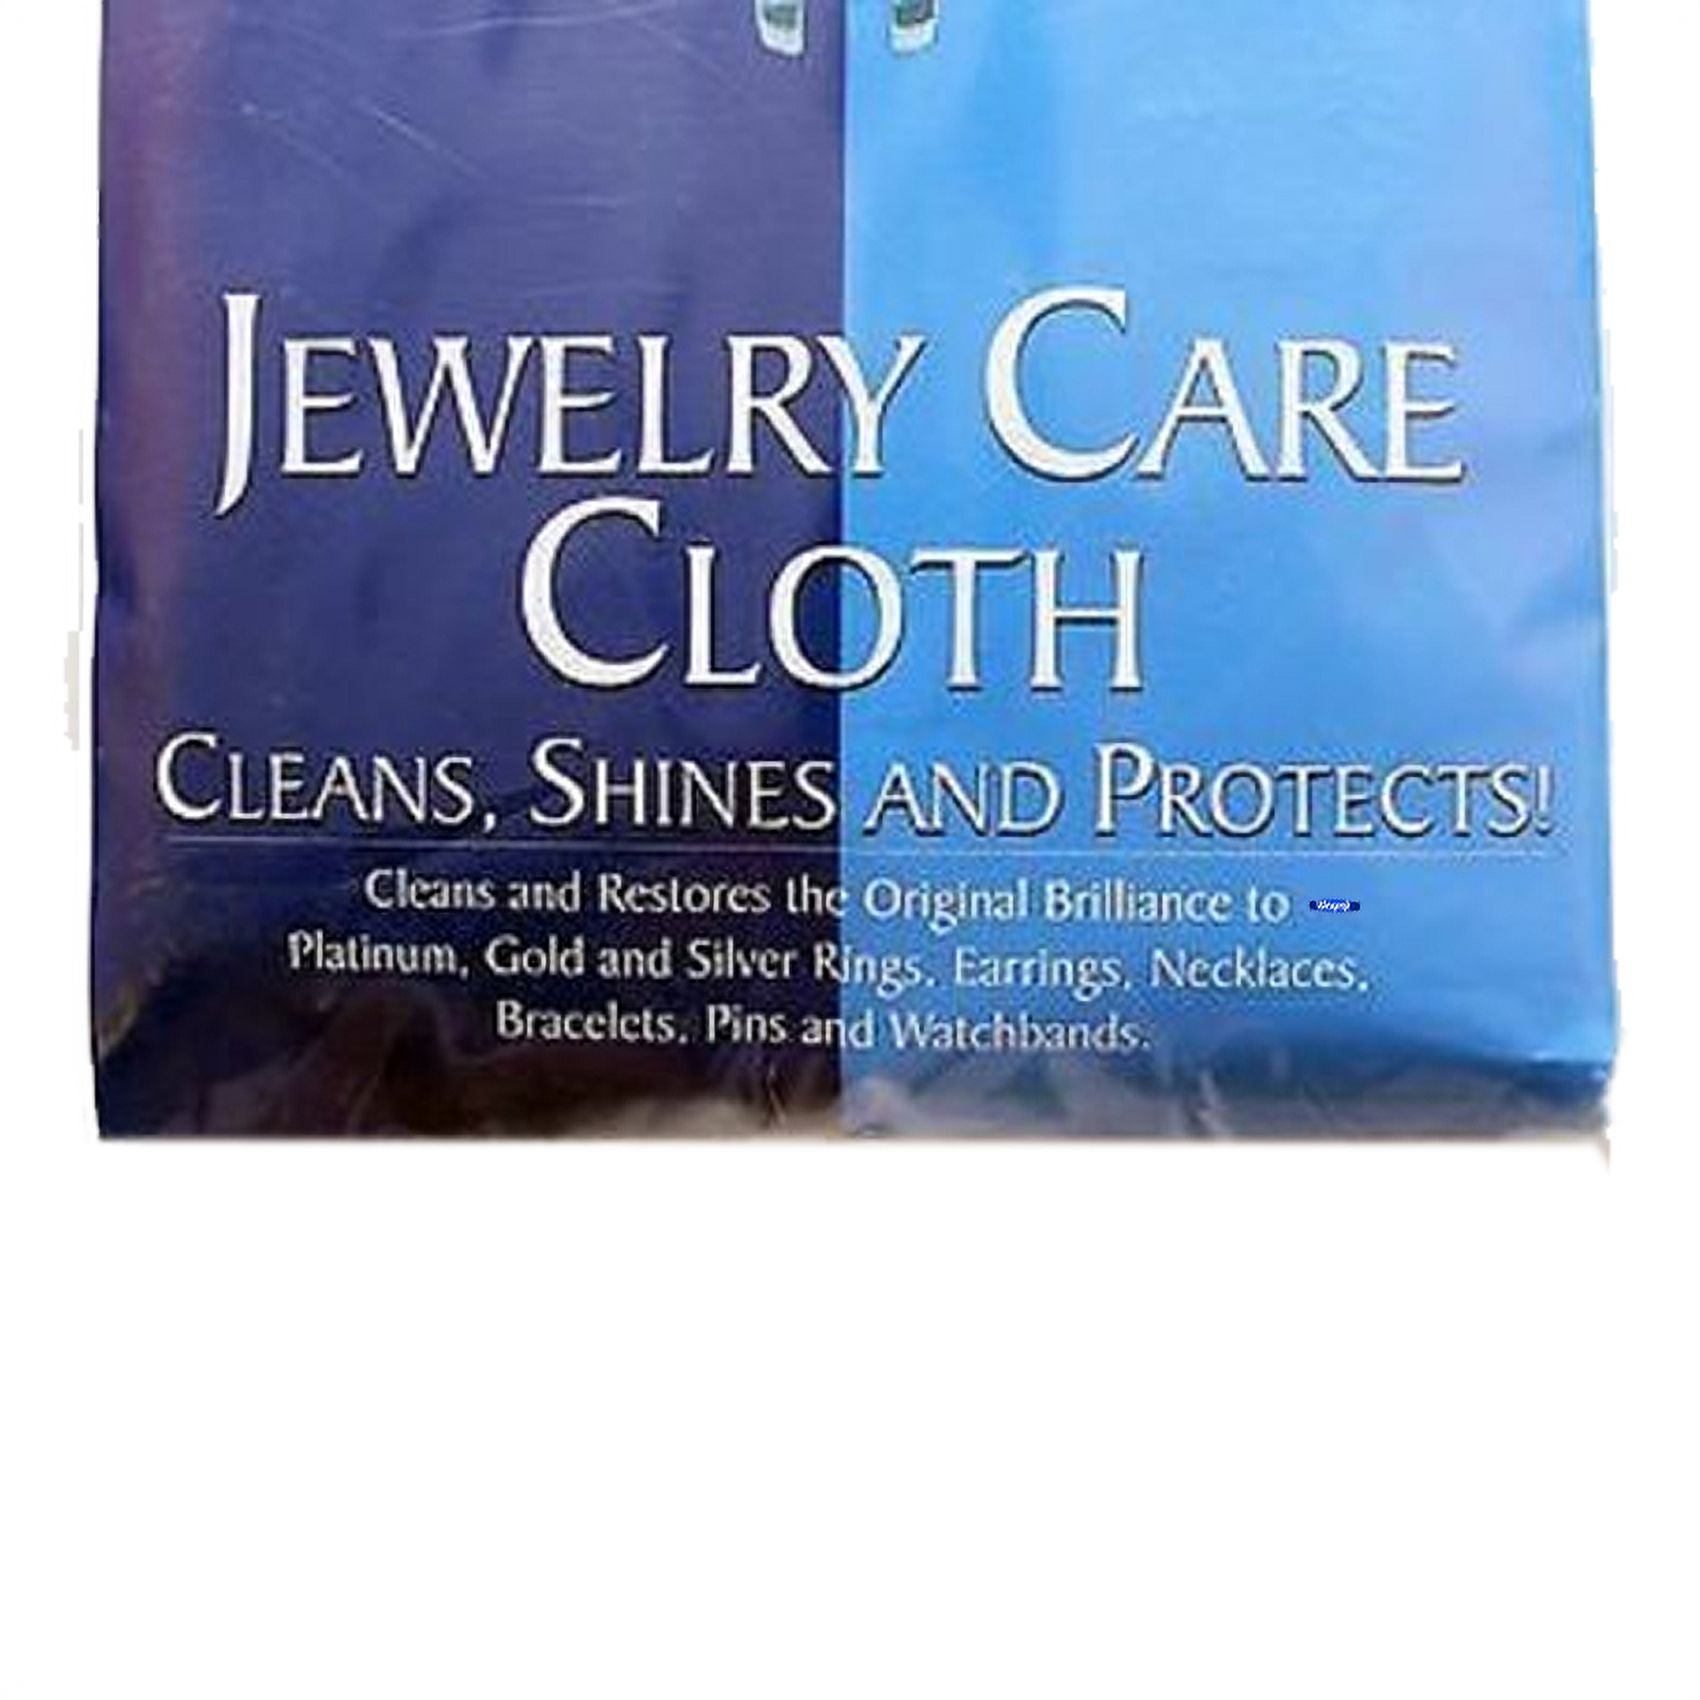 Blitz Premium XL 2-Ply Jewelry Cleaning and Polishing Cloth with Tarnish Inhibitor for Gold, Silver, and Platinum, Made in The USA, Nontoxic and